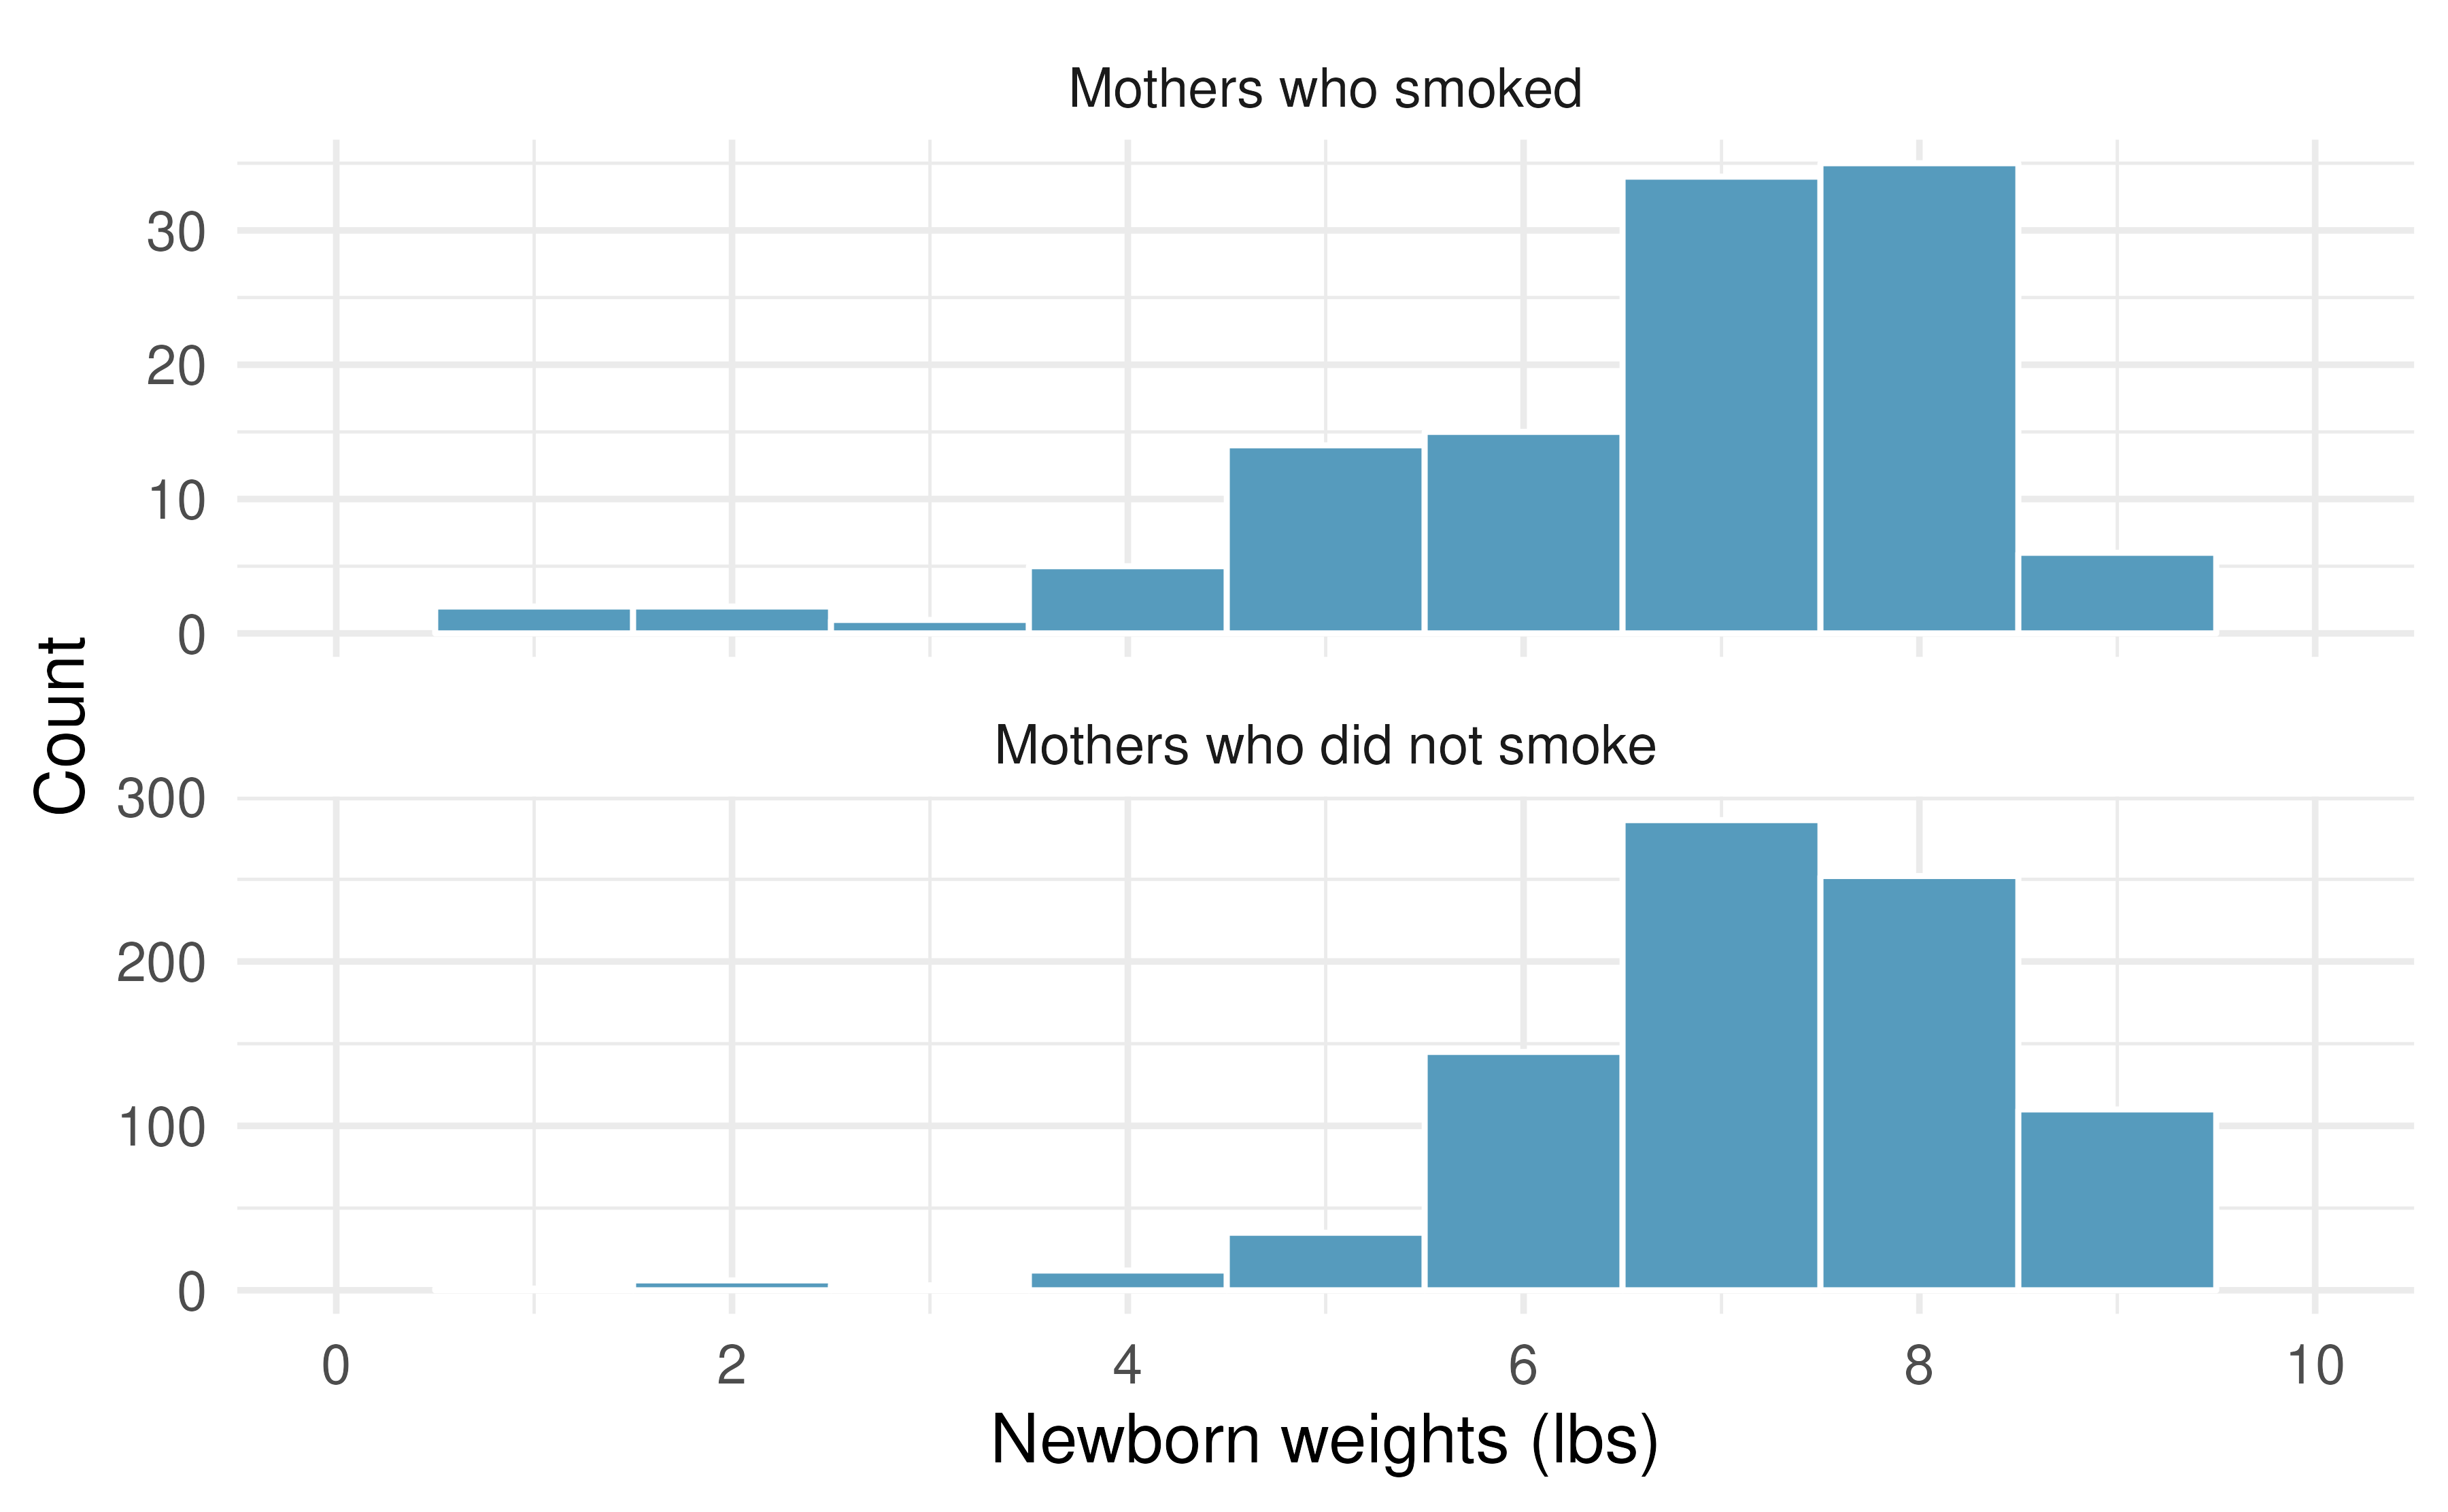 The top panel represents birth weights for infants whose mothers smoked during pregnancy. The bottom panel represents the birth weights for infants whose mothers who did not smoke during pregnancy.